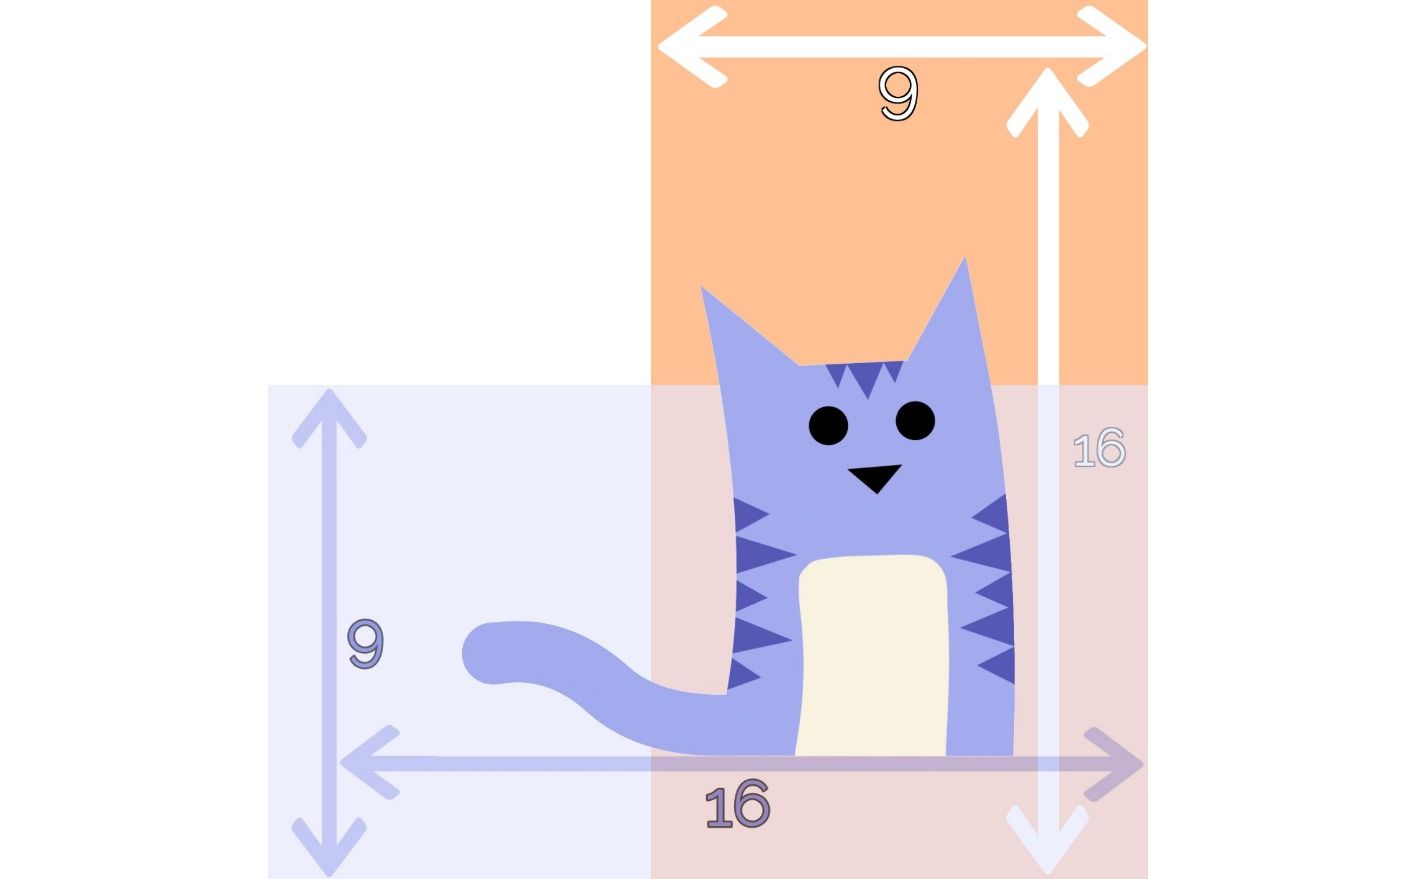 A graphic showing the recommended dimensions for Facebook content.